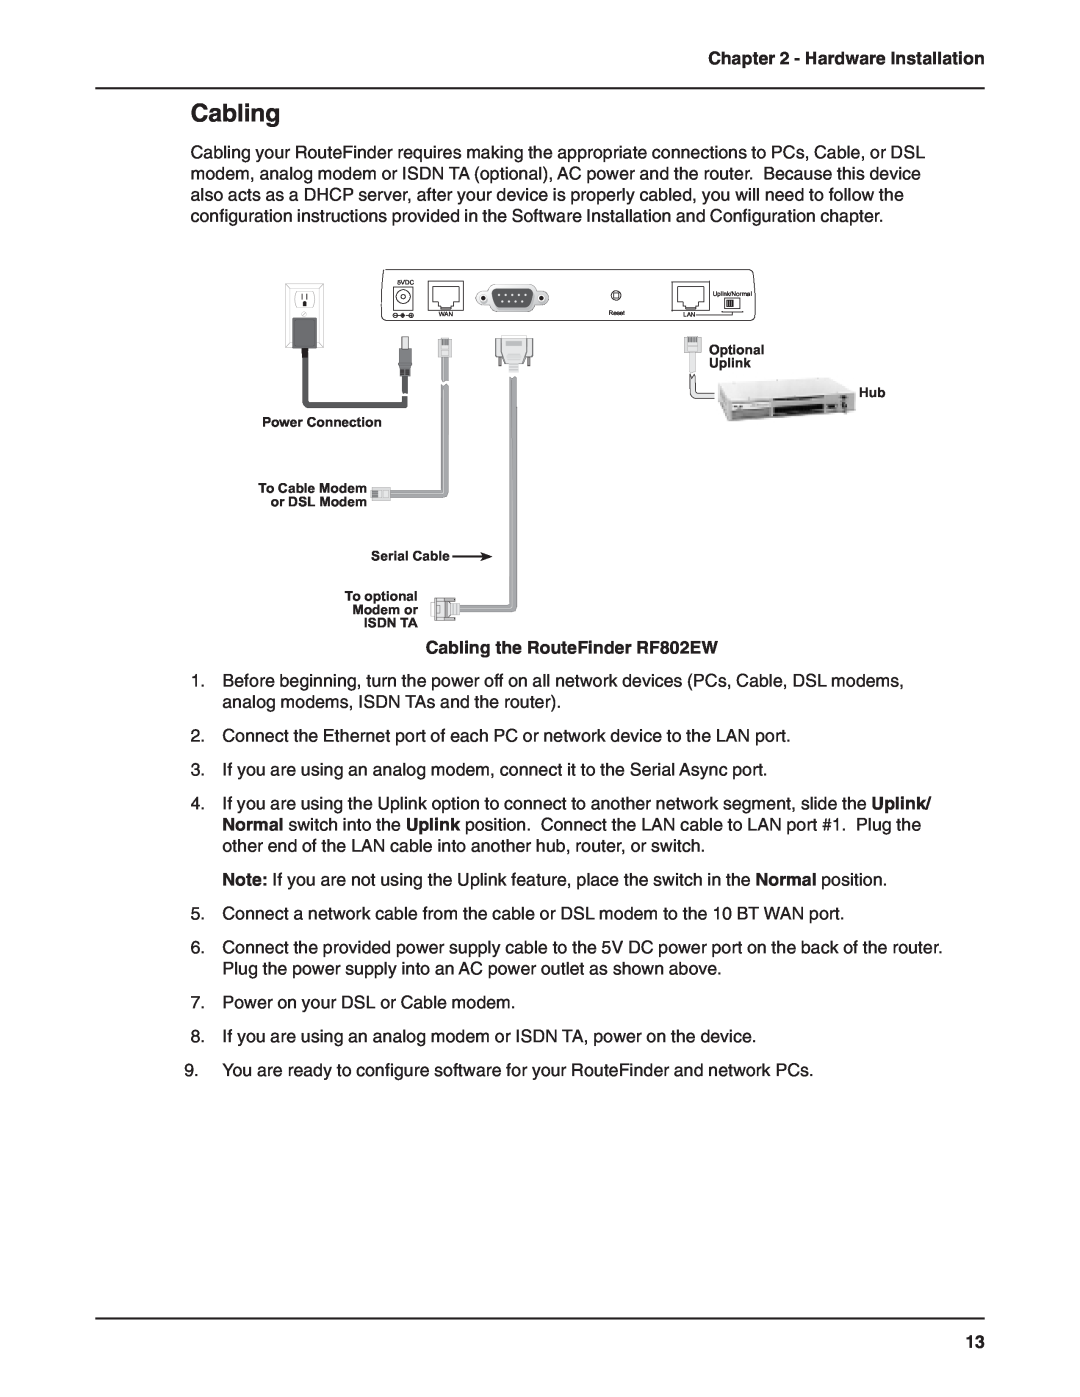 Multi-Tech Systems manual Cabling the RouteFinder RF802EW, Hardware Installation 